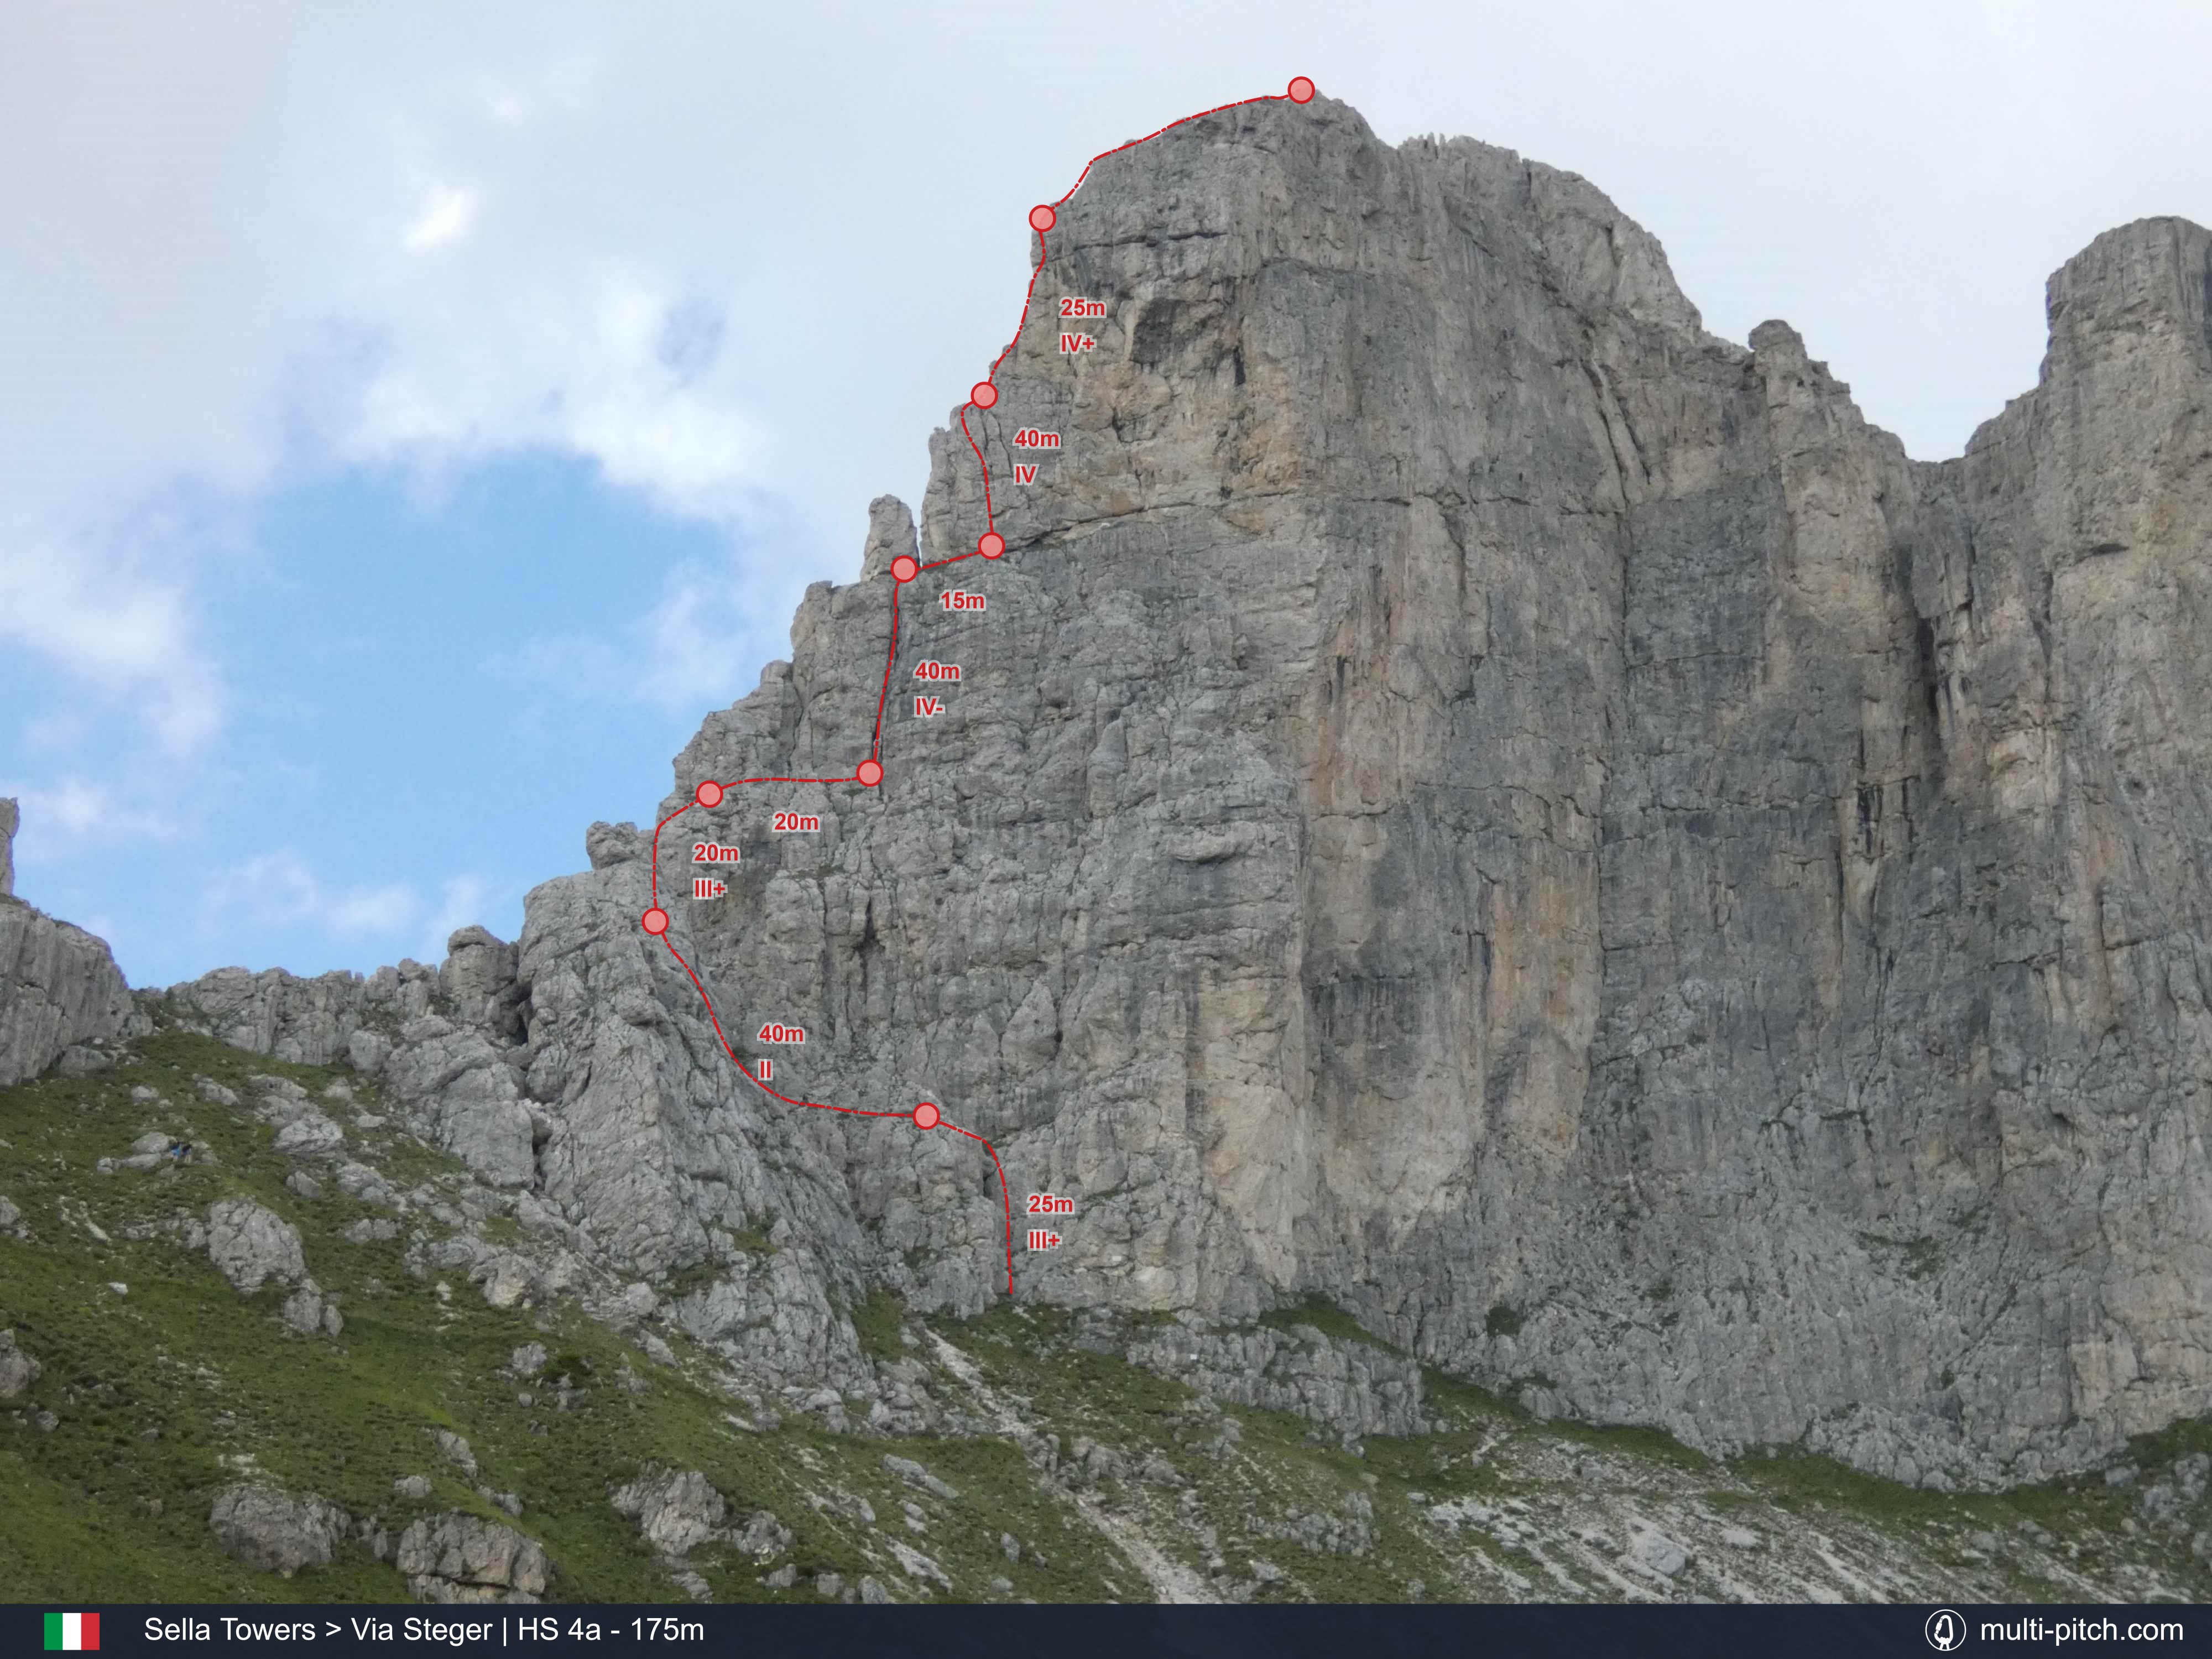 Via Steger on the first Sella Tower in the Dolomites